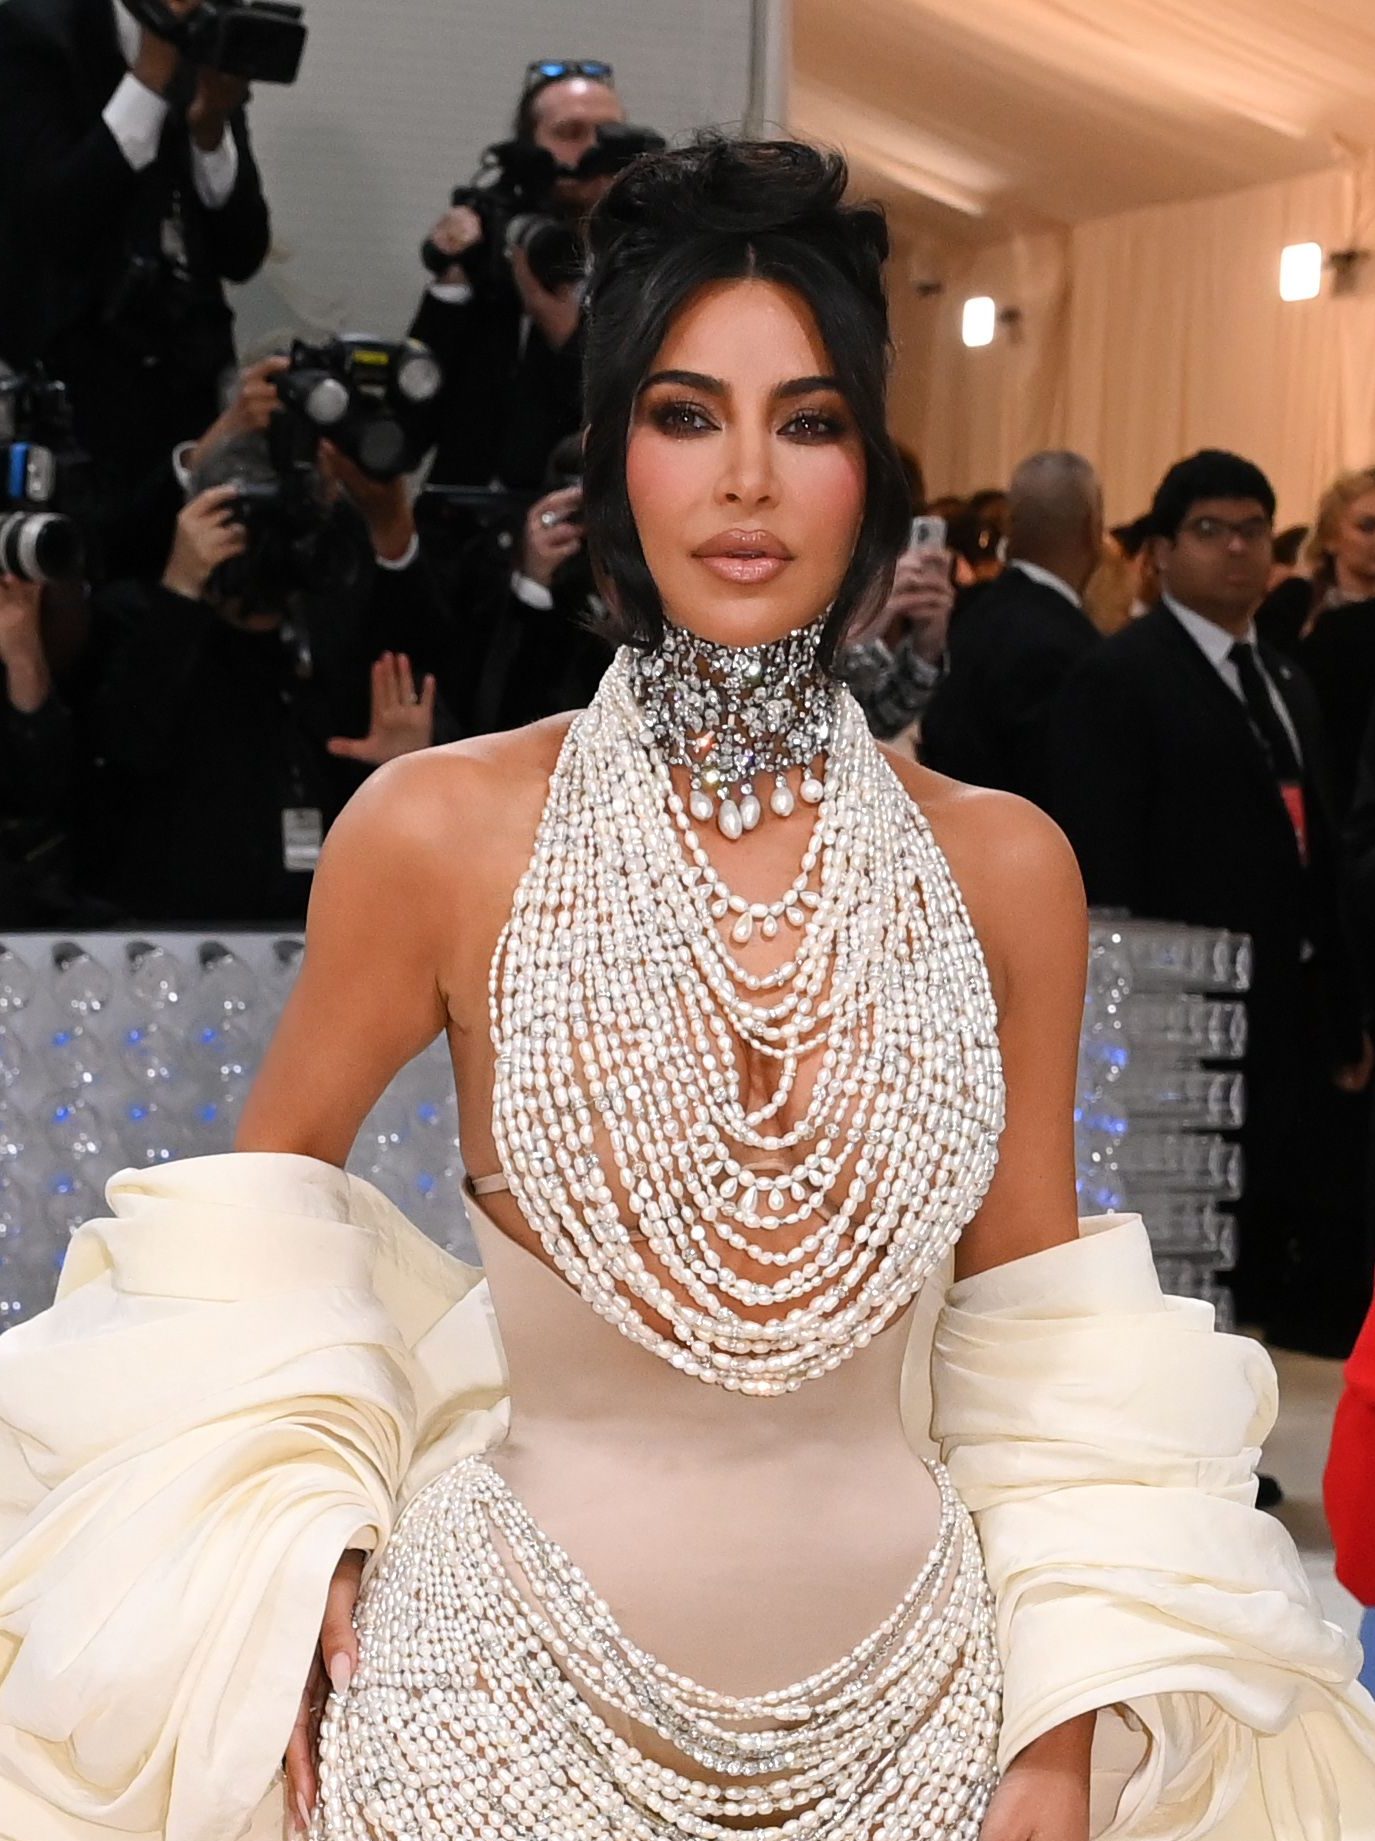 Every Outfit the Kardashian-Jenners Have Worn to the Met Gala